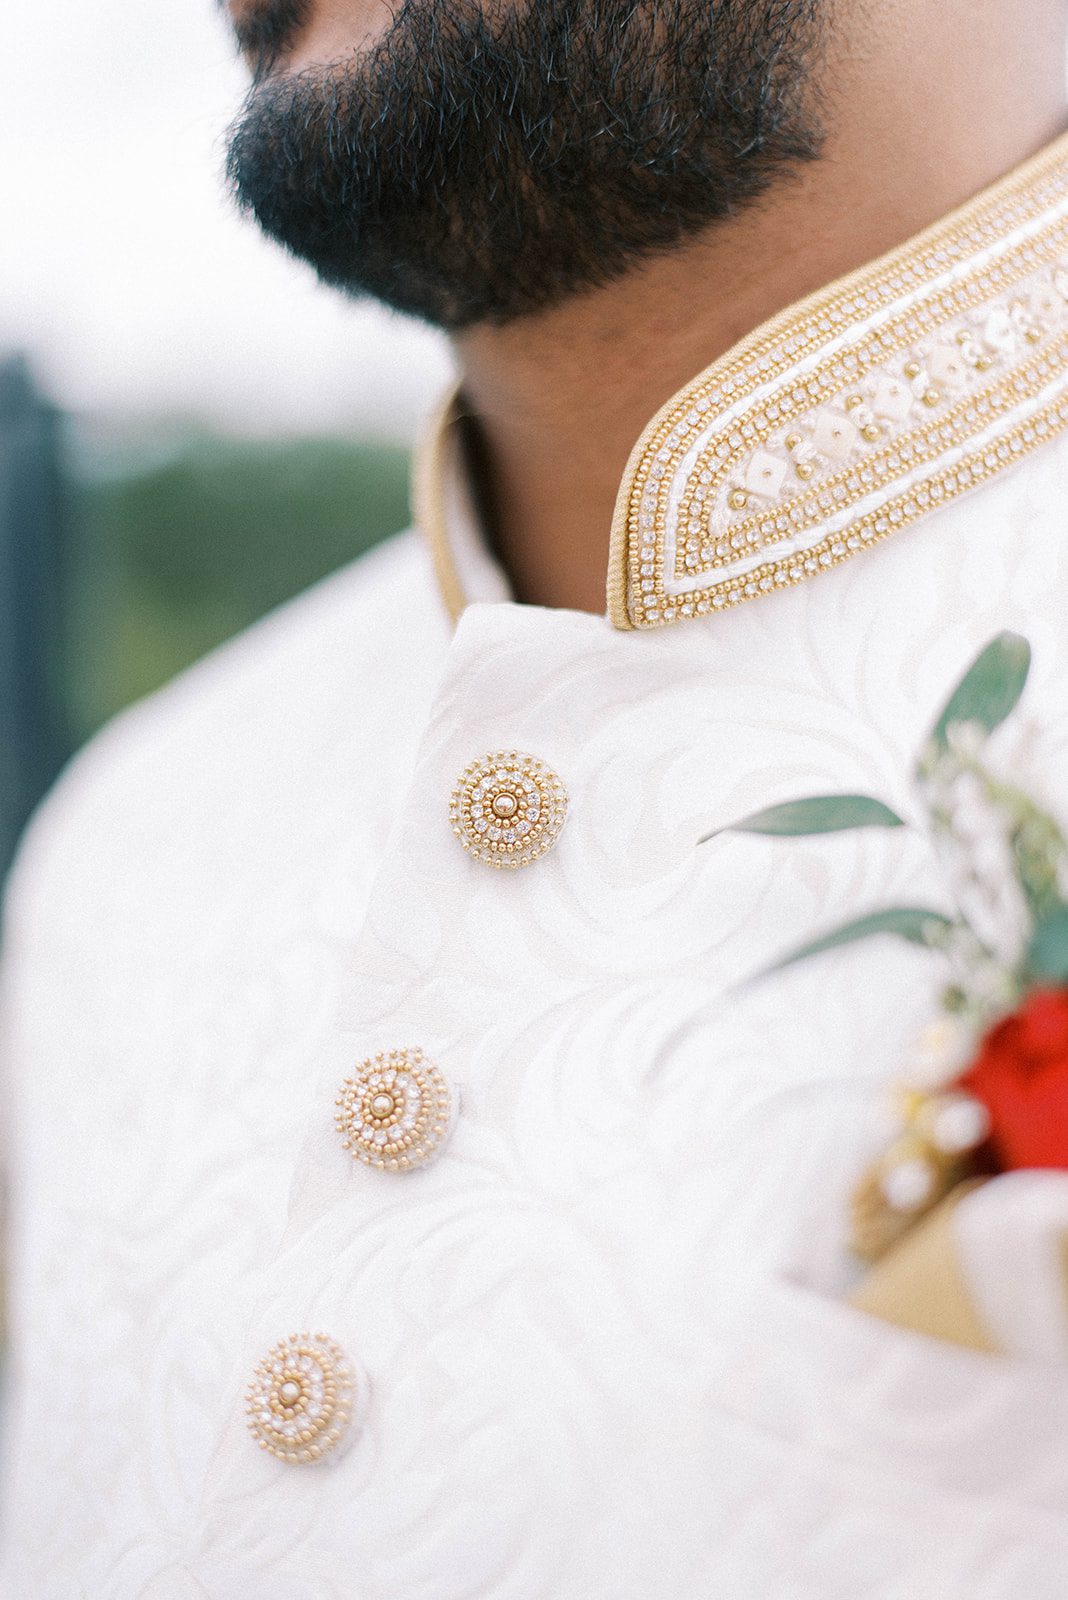 close up detail shot of Indian wedding outfit for the groom in a white suit with beaded buttons and collar